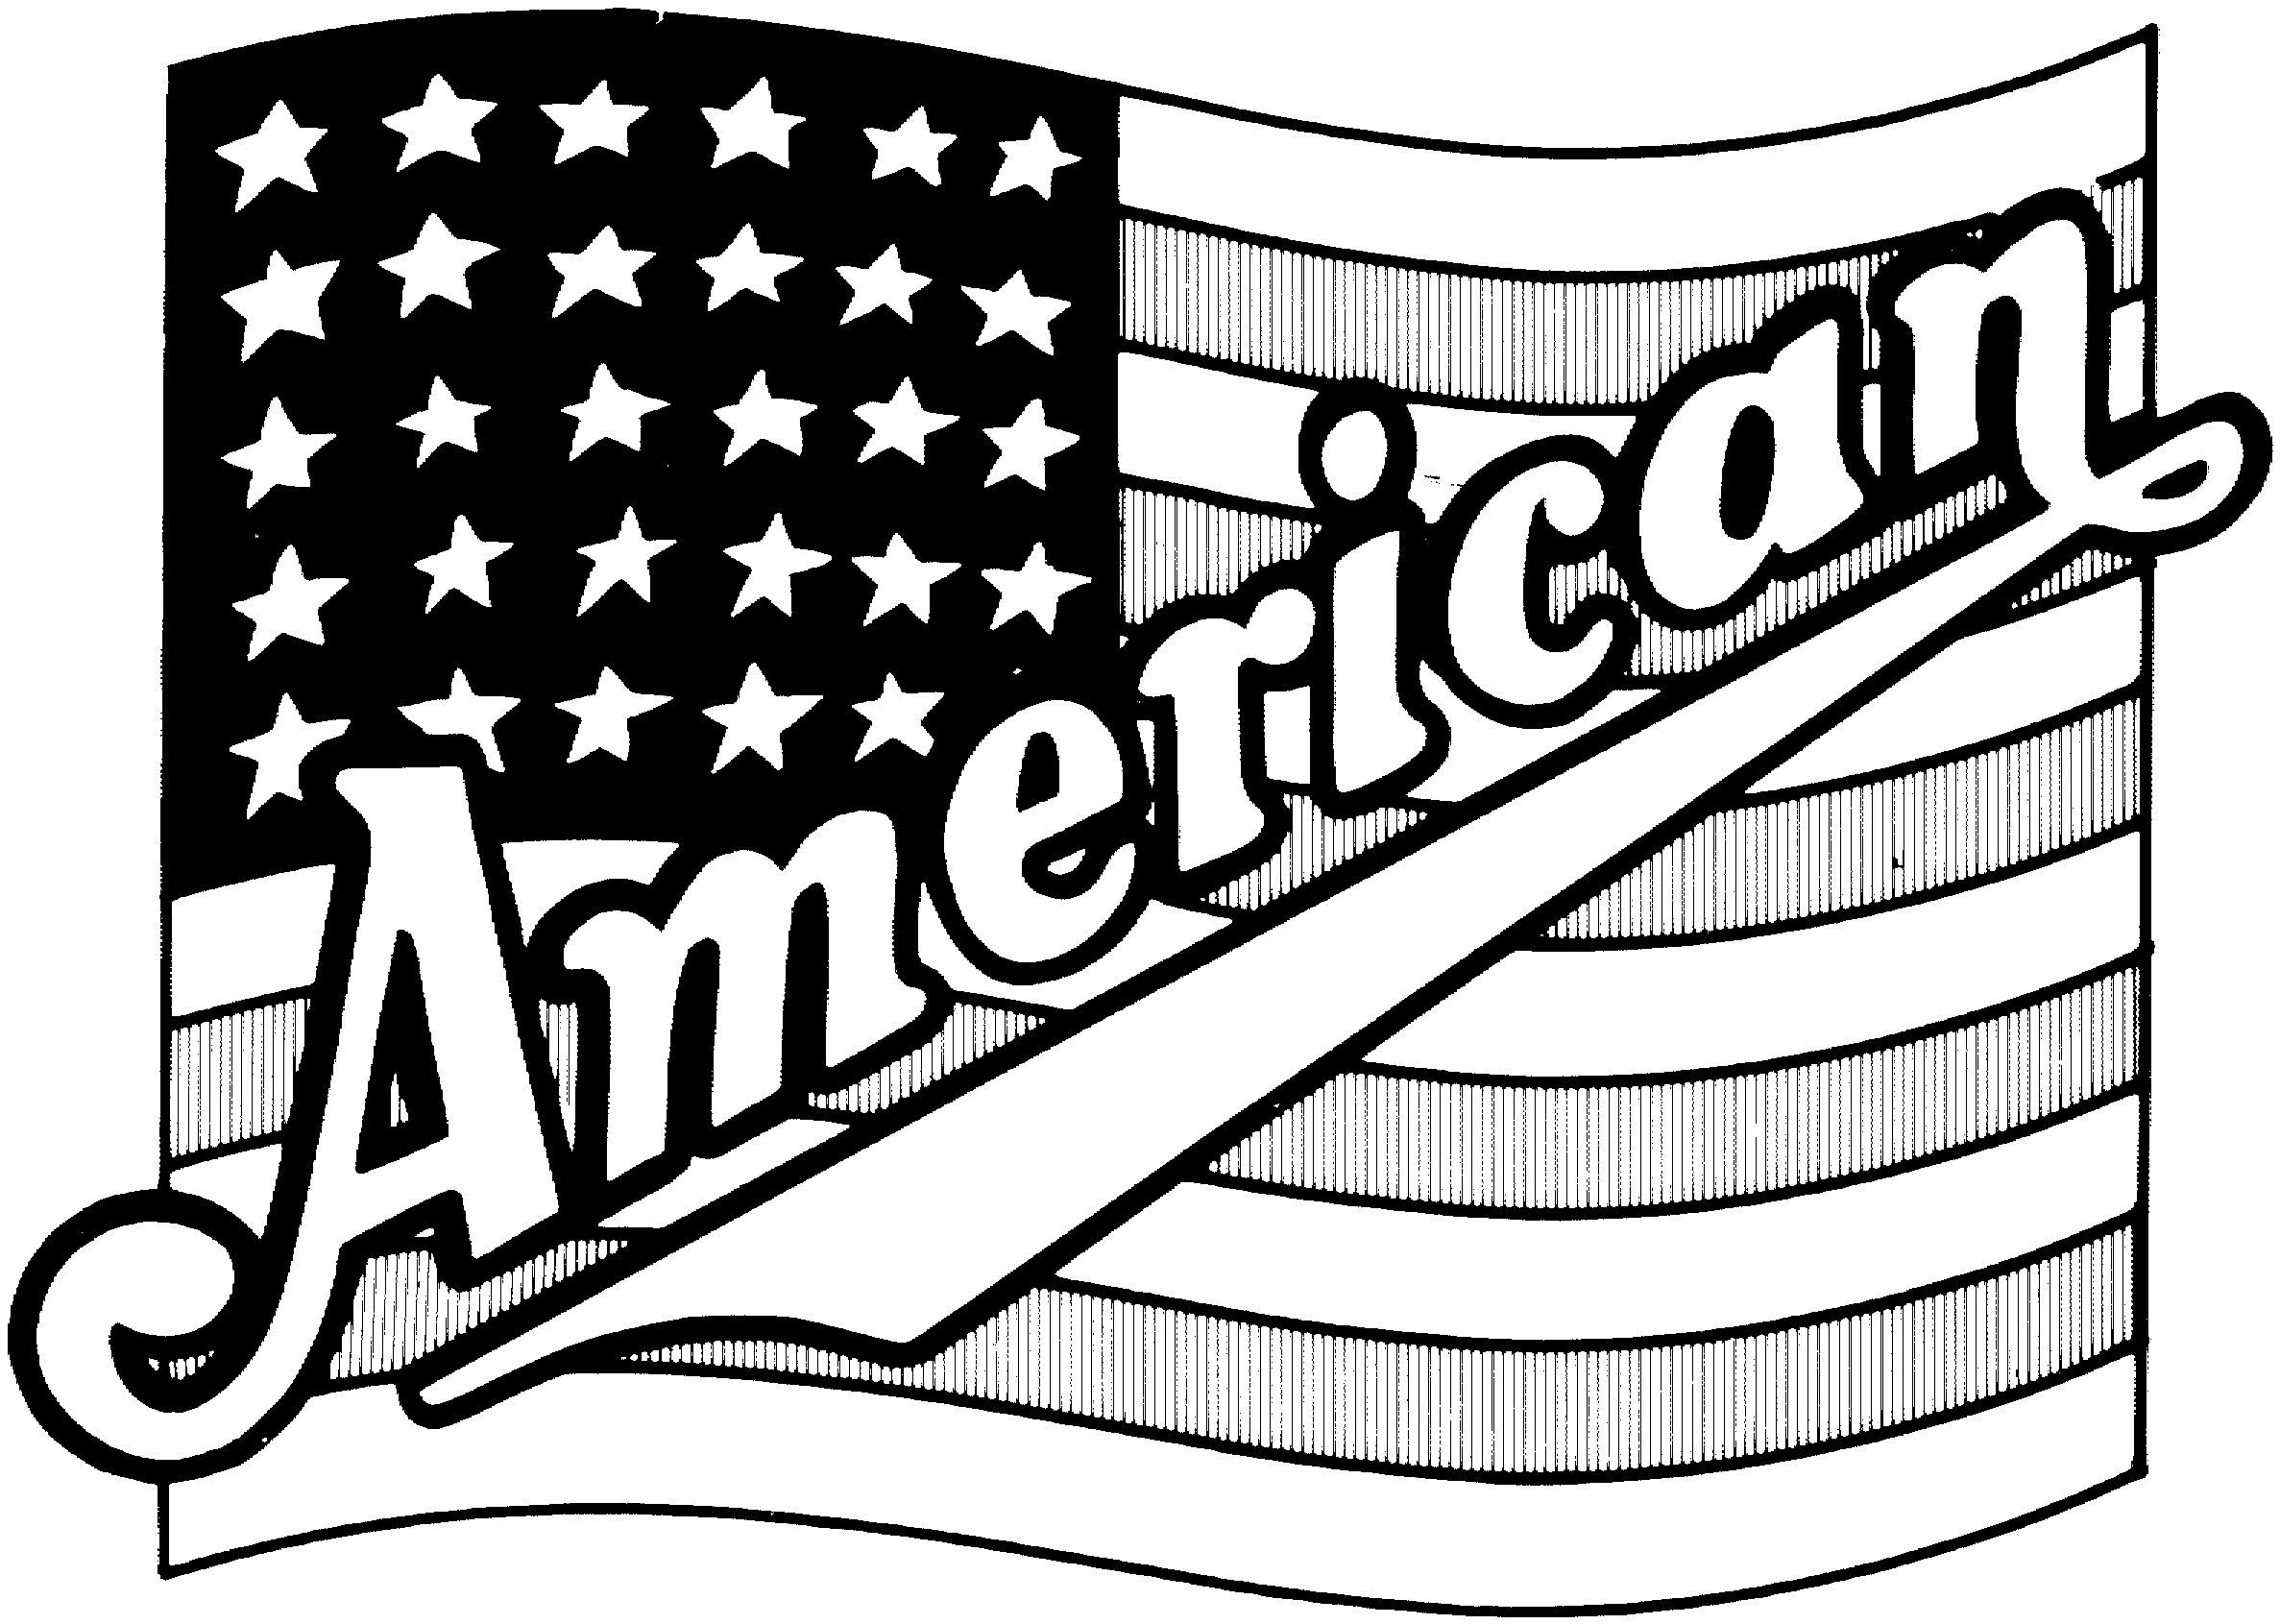 American flag coloring pages 2018 Z31 Coloring Page